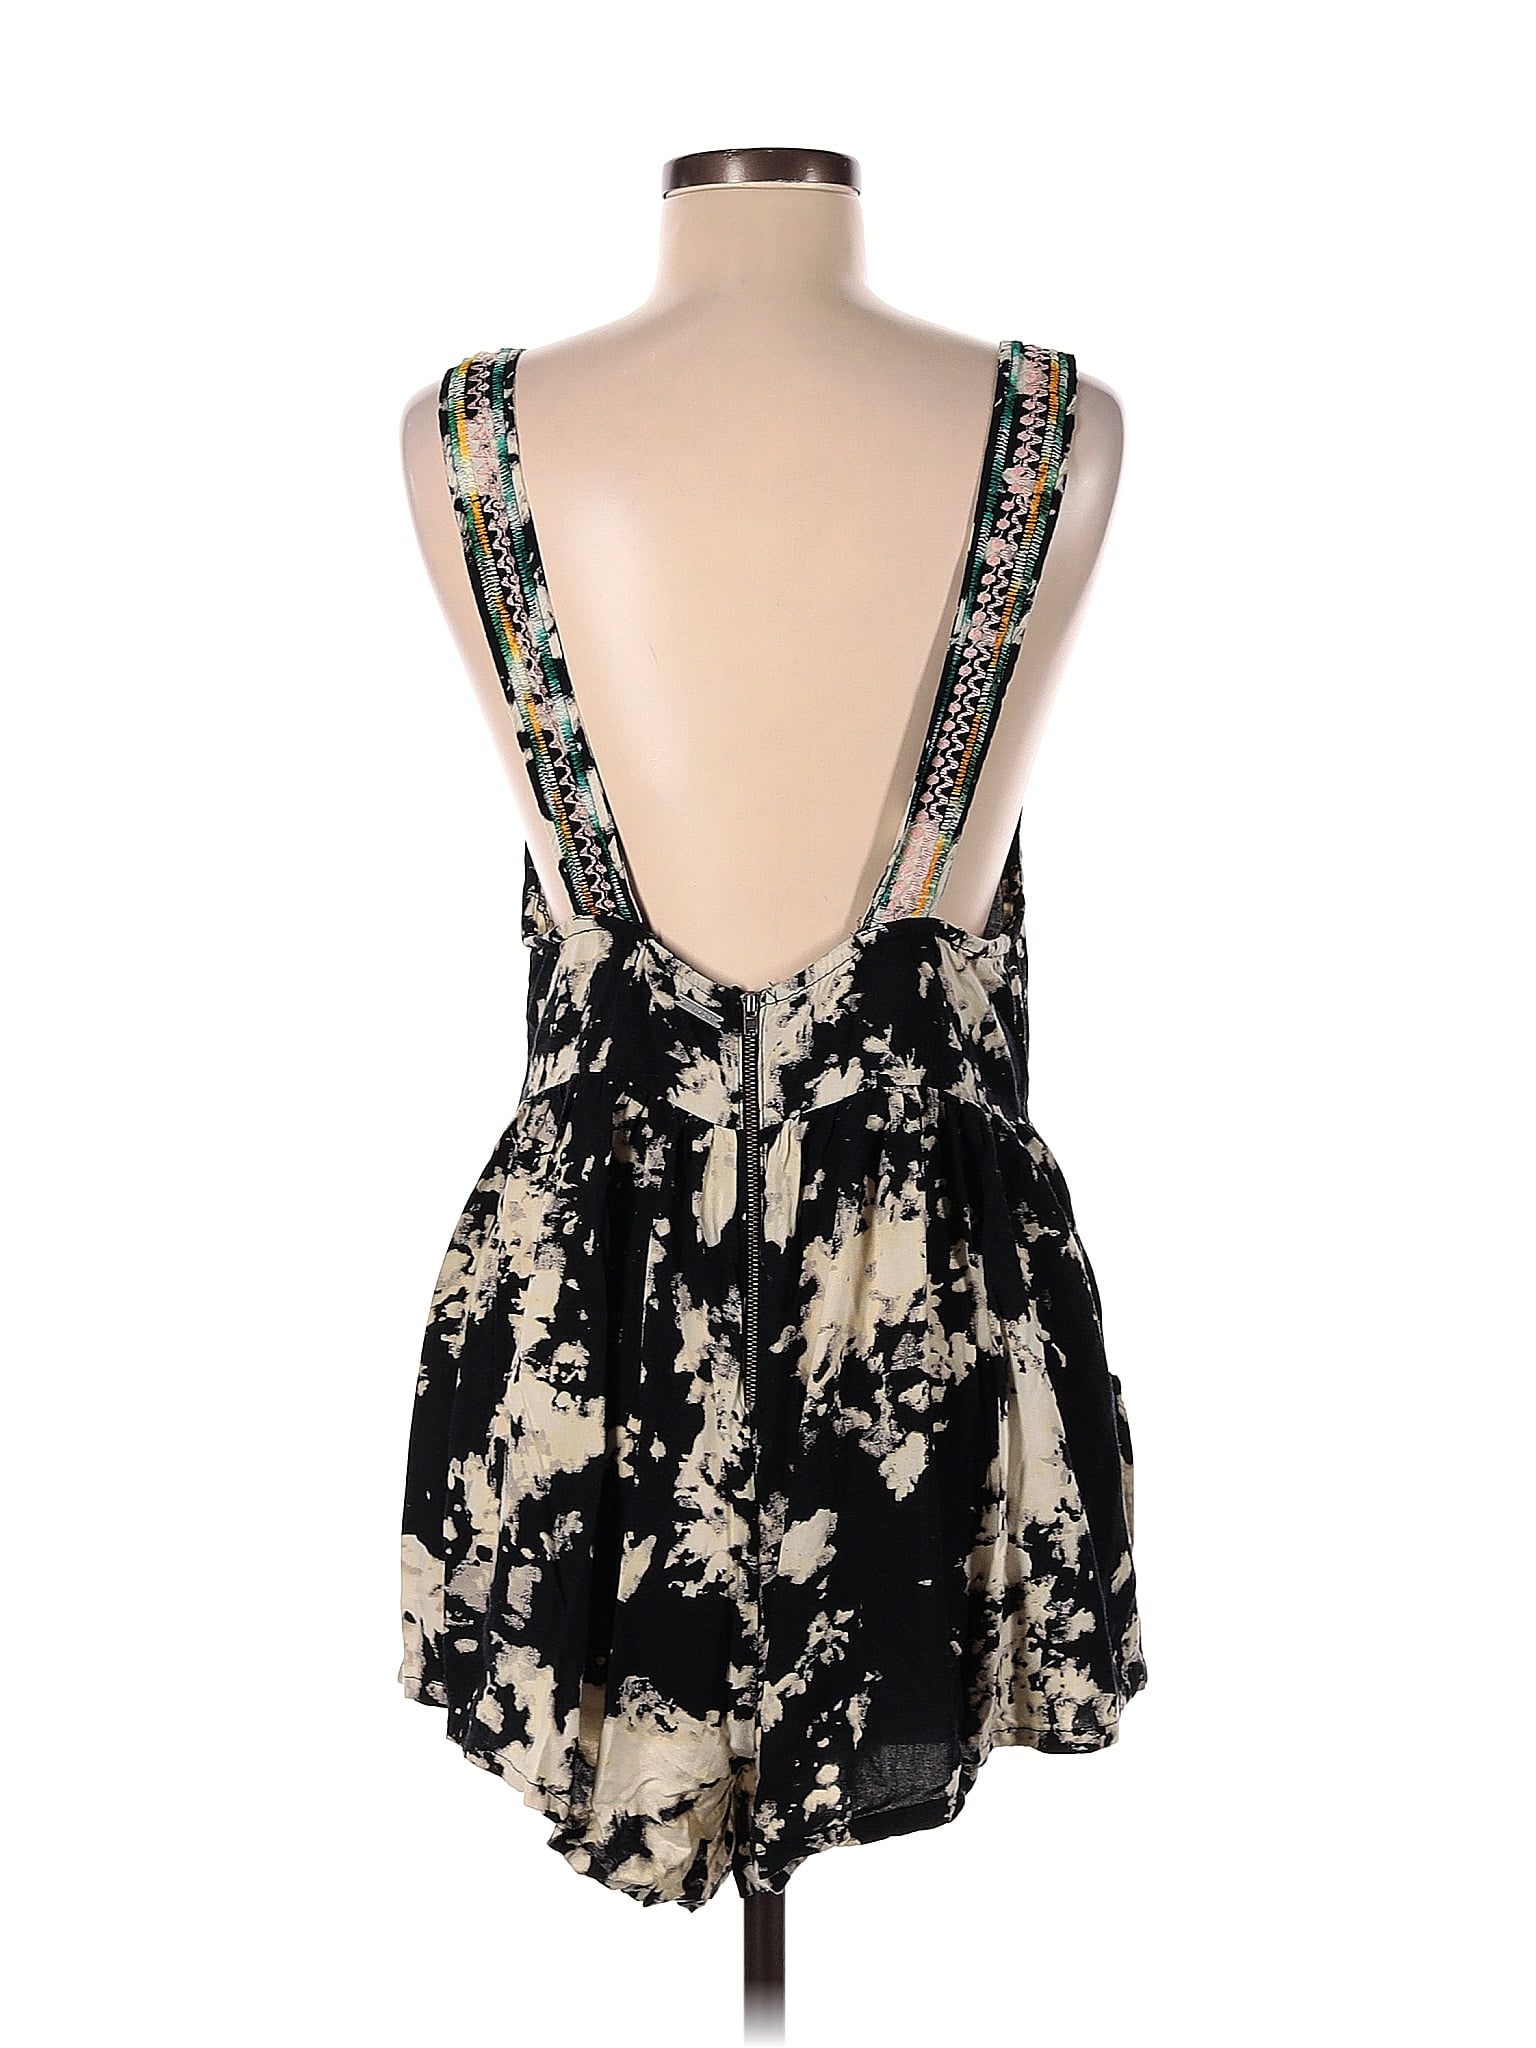 Sonoma Goods for Life 100% Rayon Floral Black Short Sleeve Blouse Size XL -  52% off